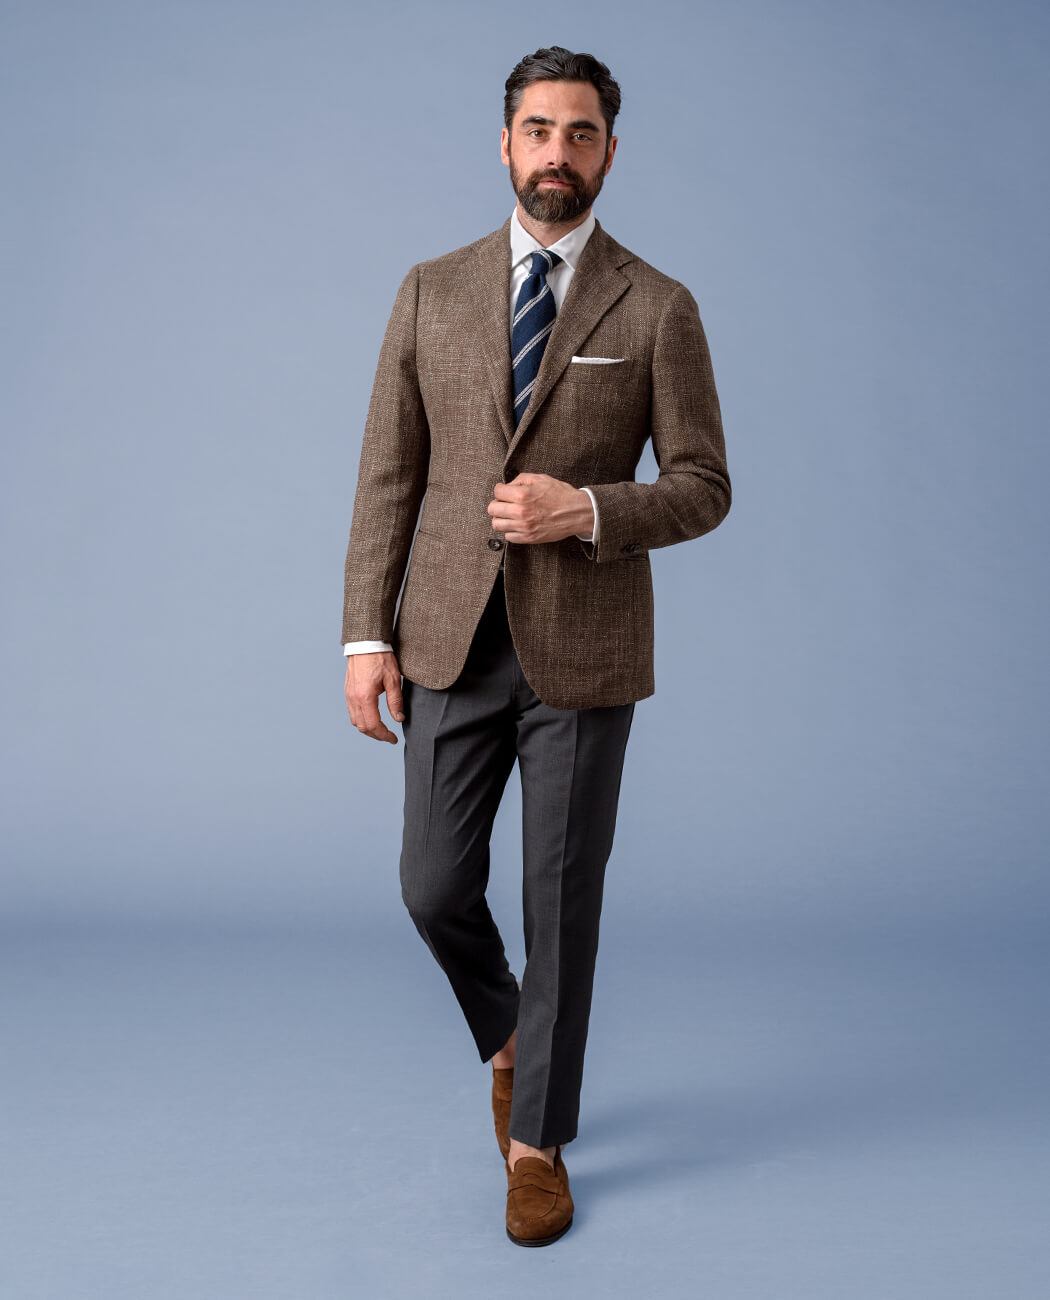 Tailored Clothing | Custom Suits, Jackets and Trousers - Proper Cloth